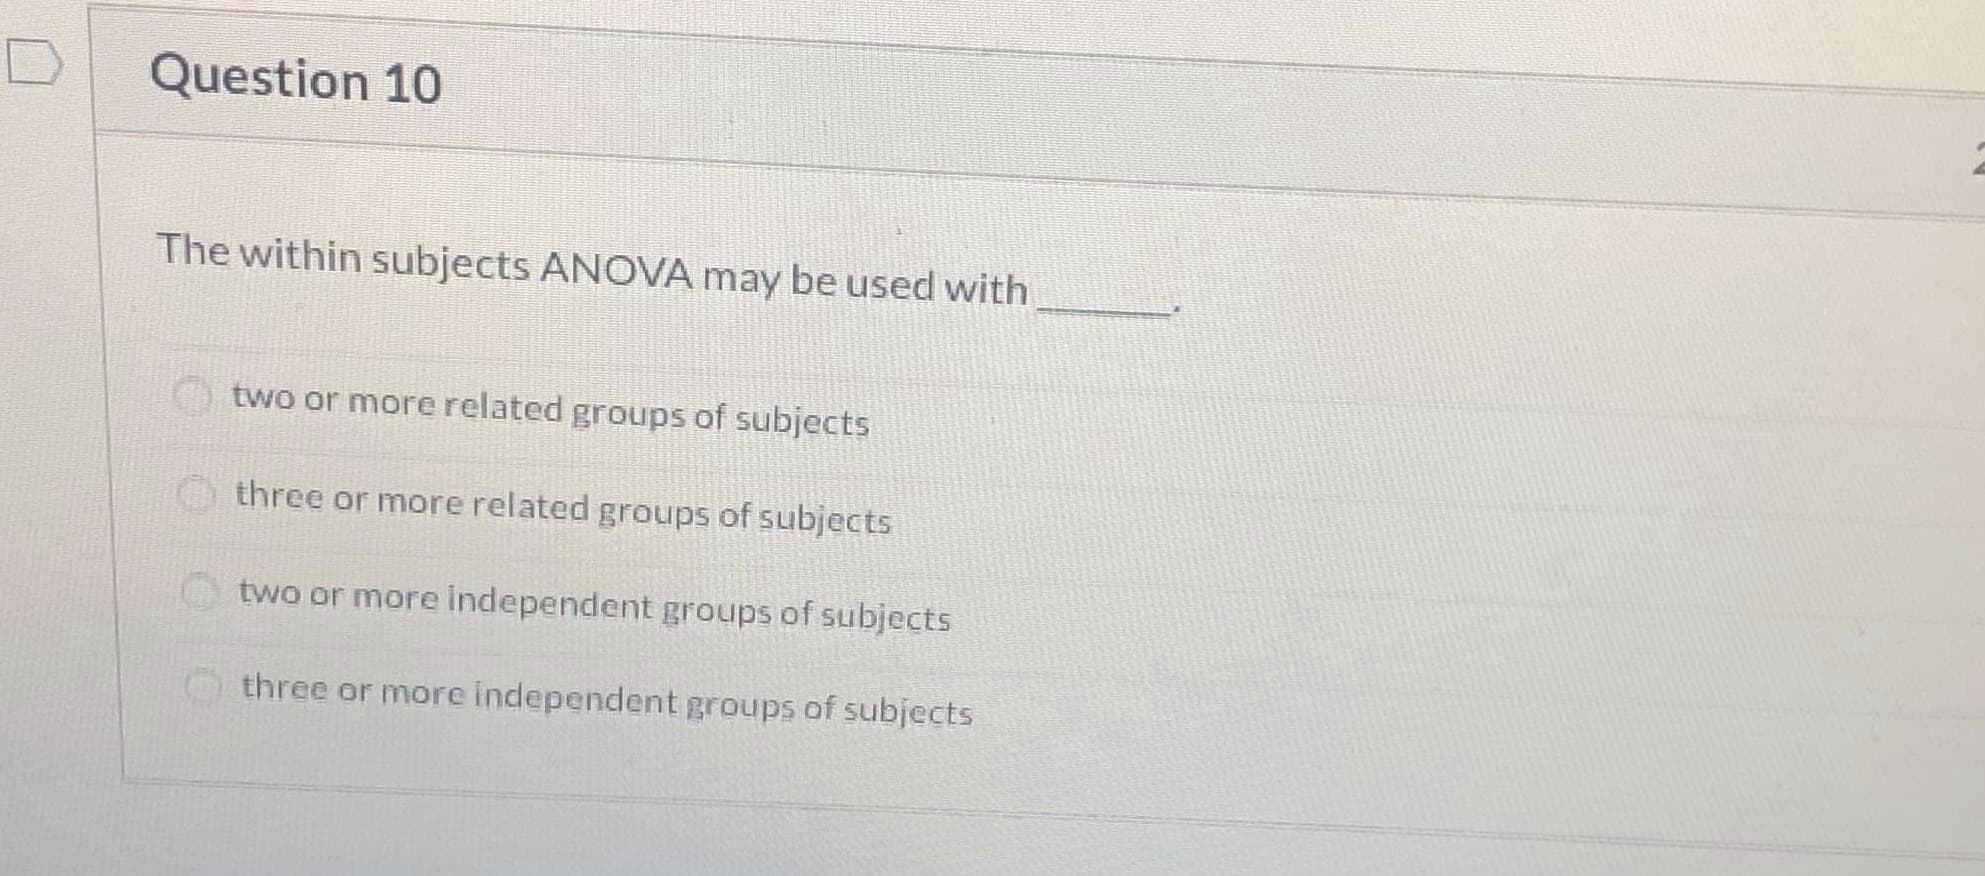 The within subjects ANOVA may be used with
